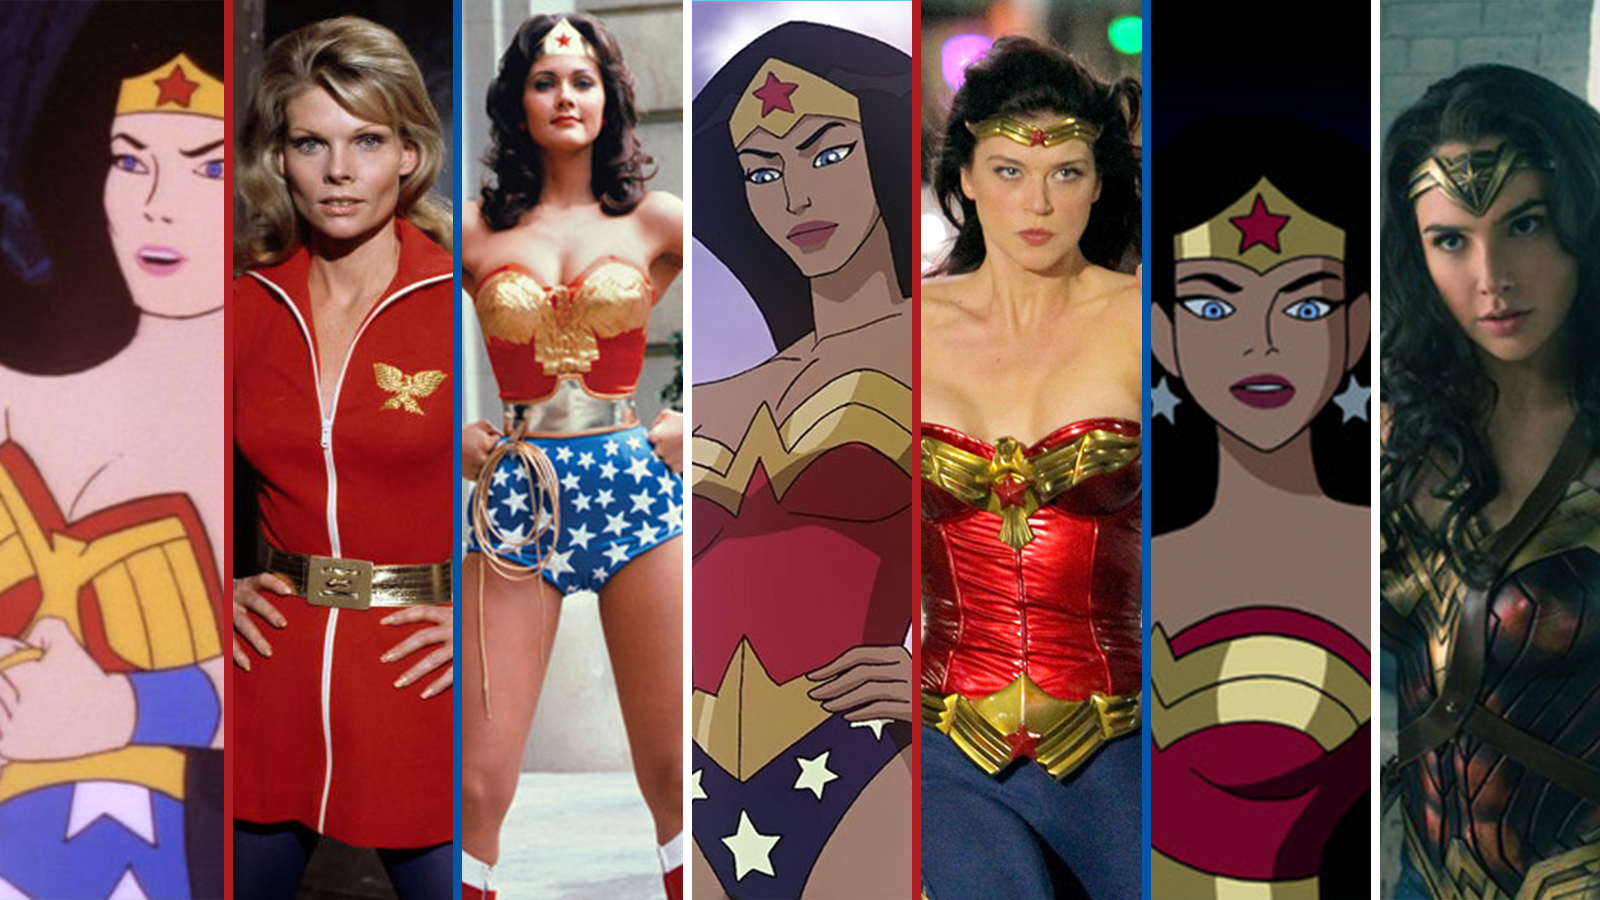 The evolution of Wonder Woman pic